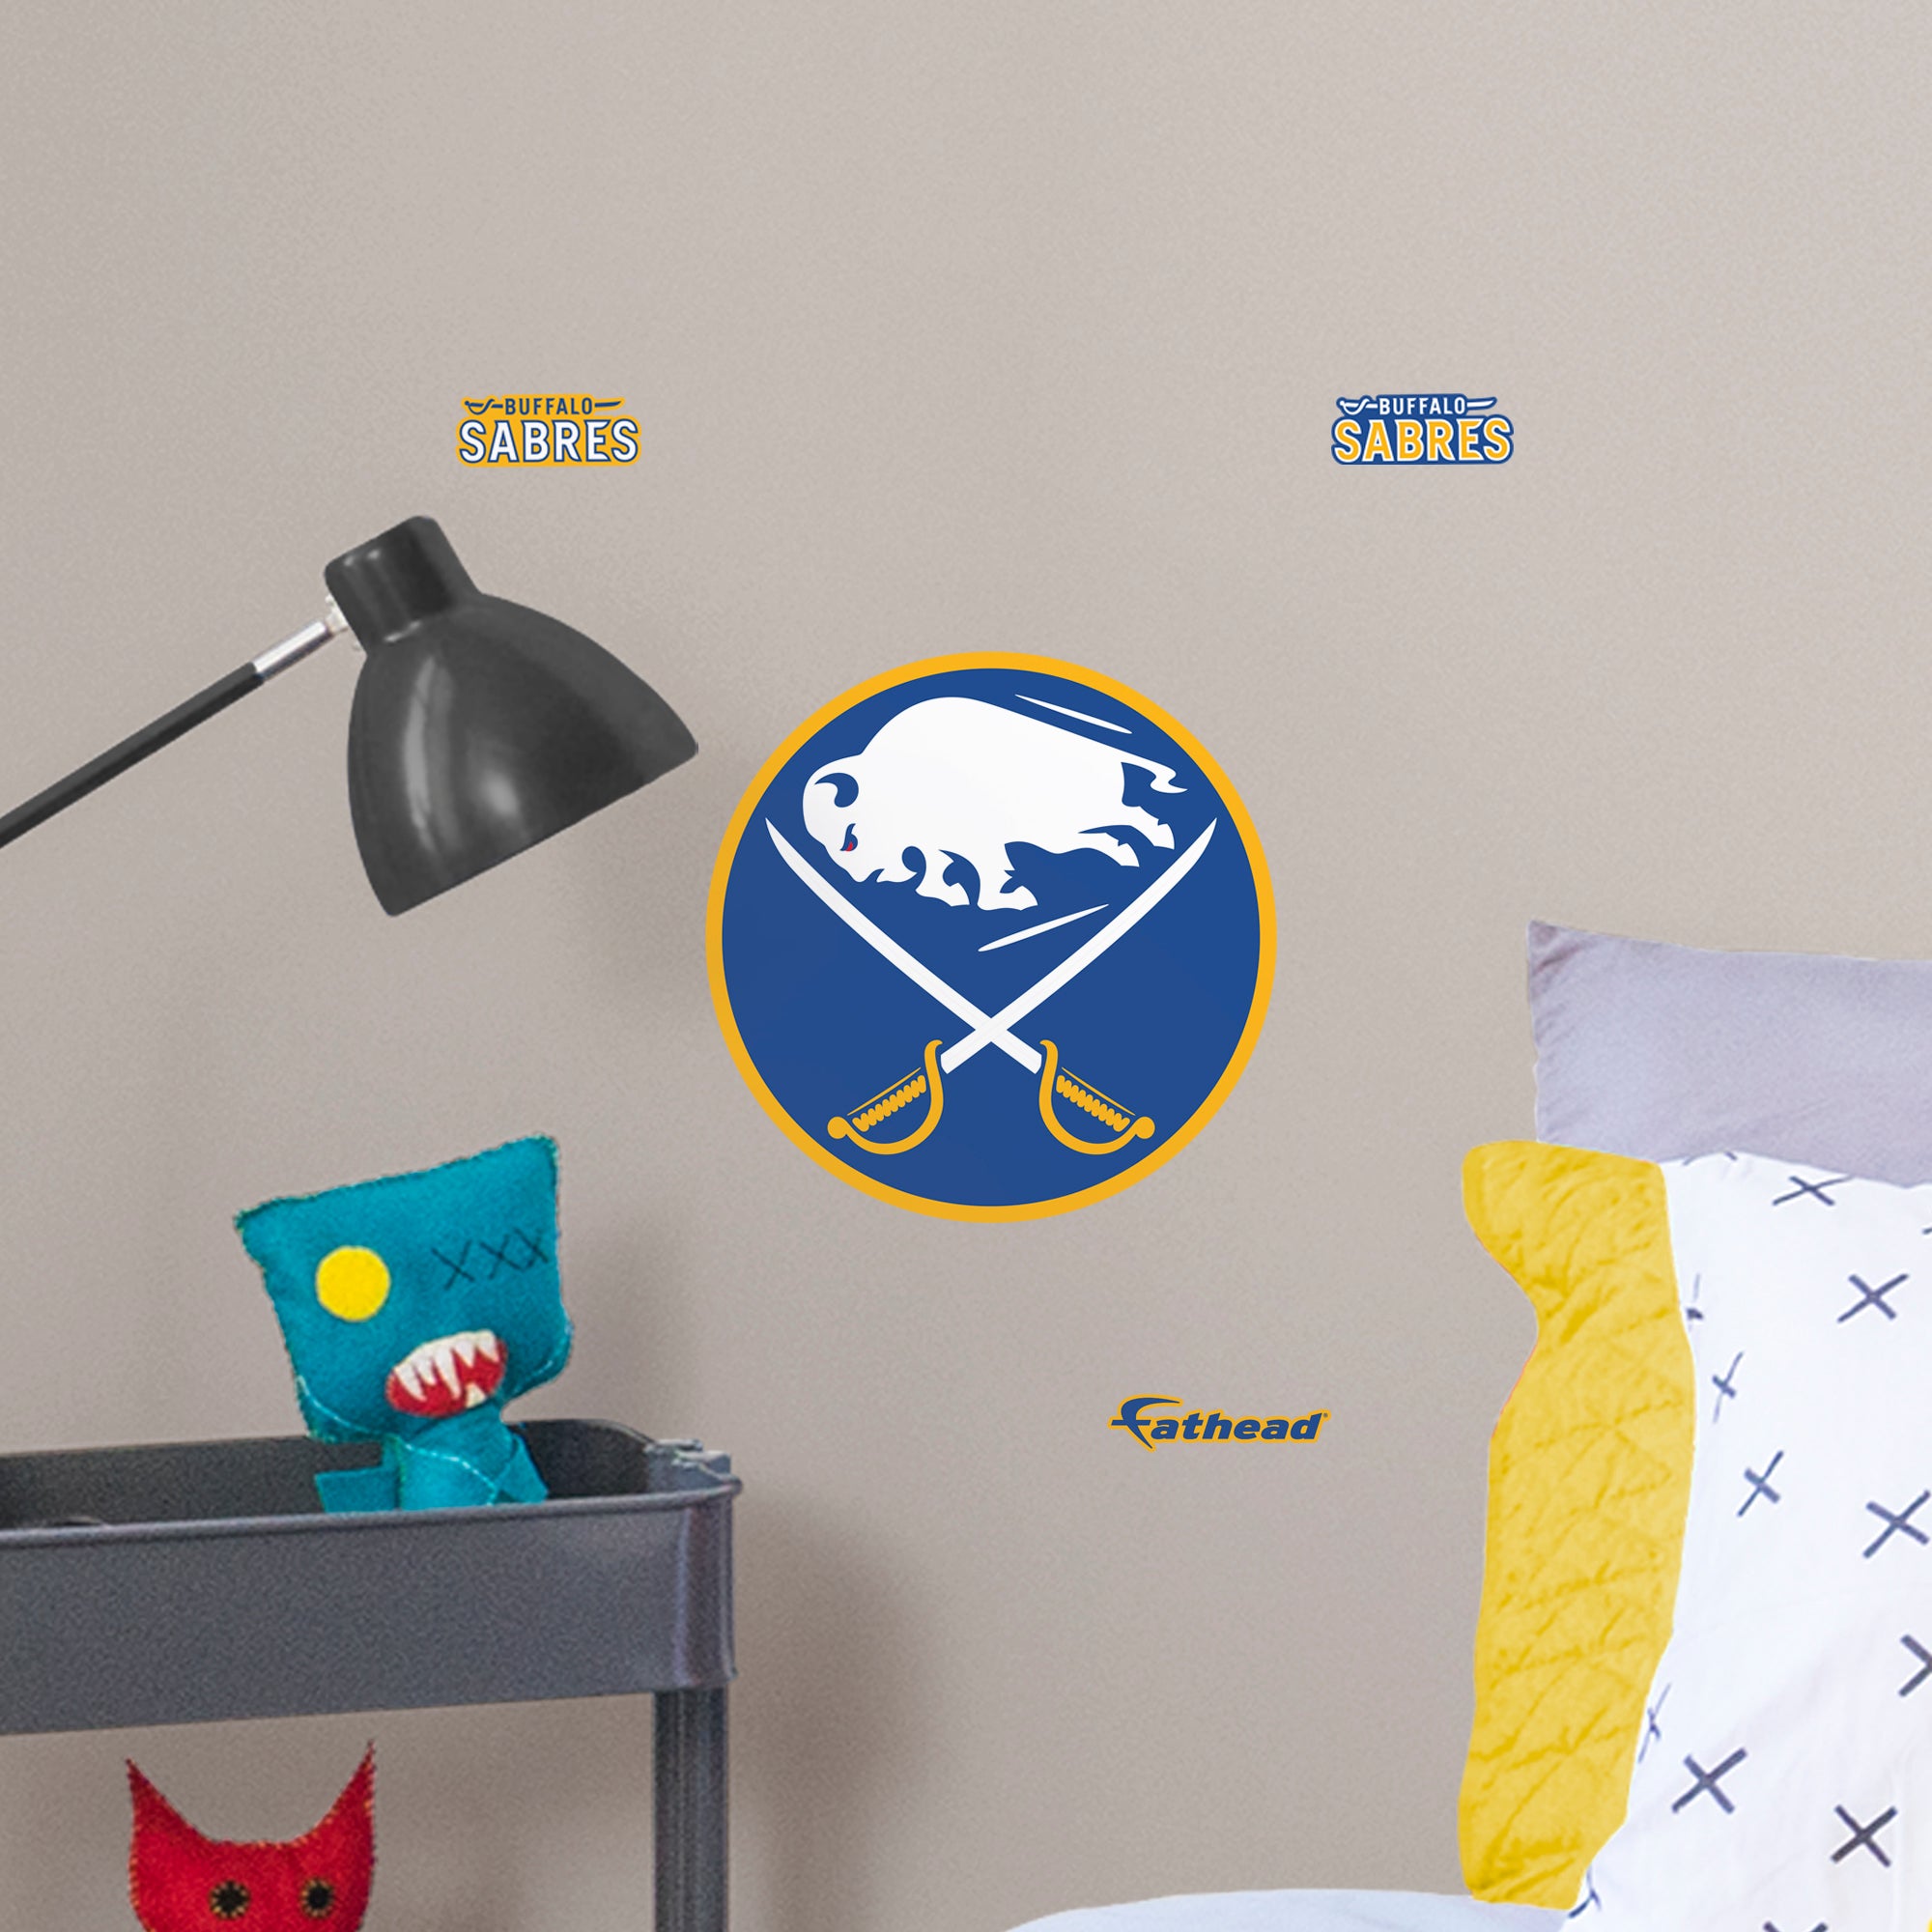 Buffalo Sabres 2020 POD Teammate Logo Officially Licensed NHL Removable Wall Decal Large by Fathead | Vinyl